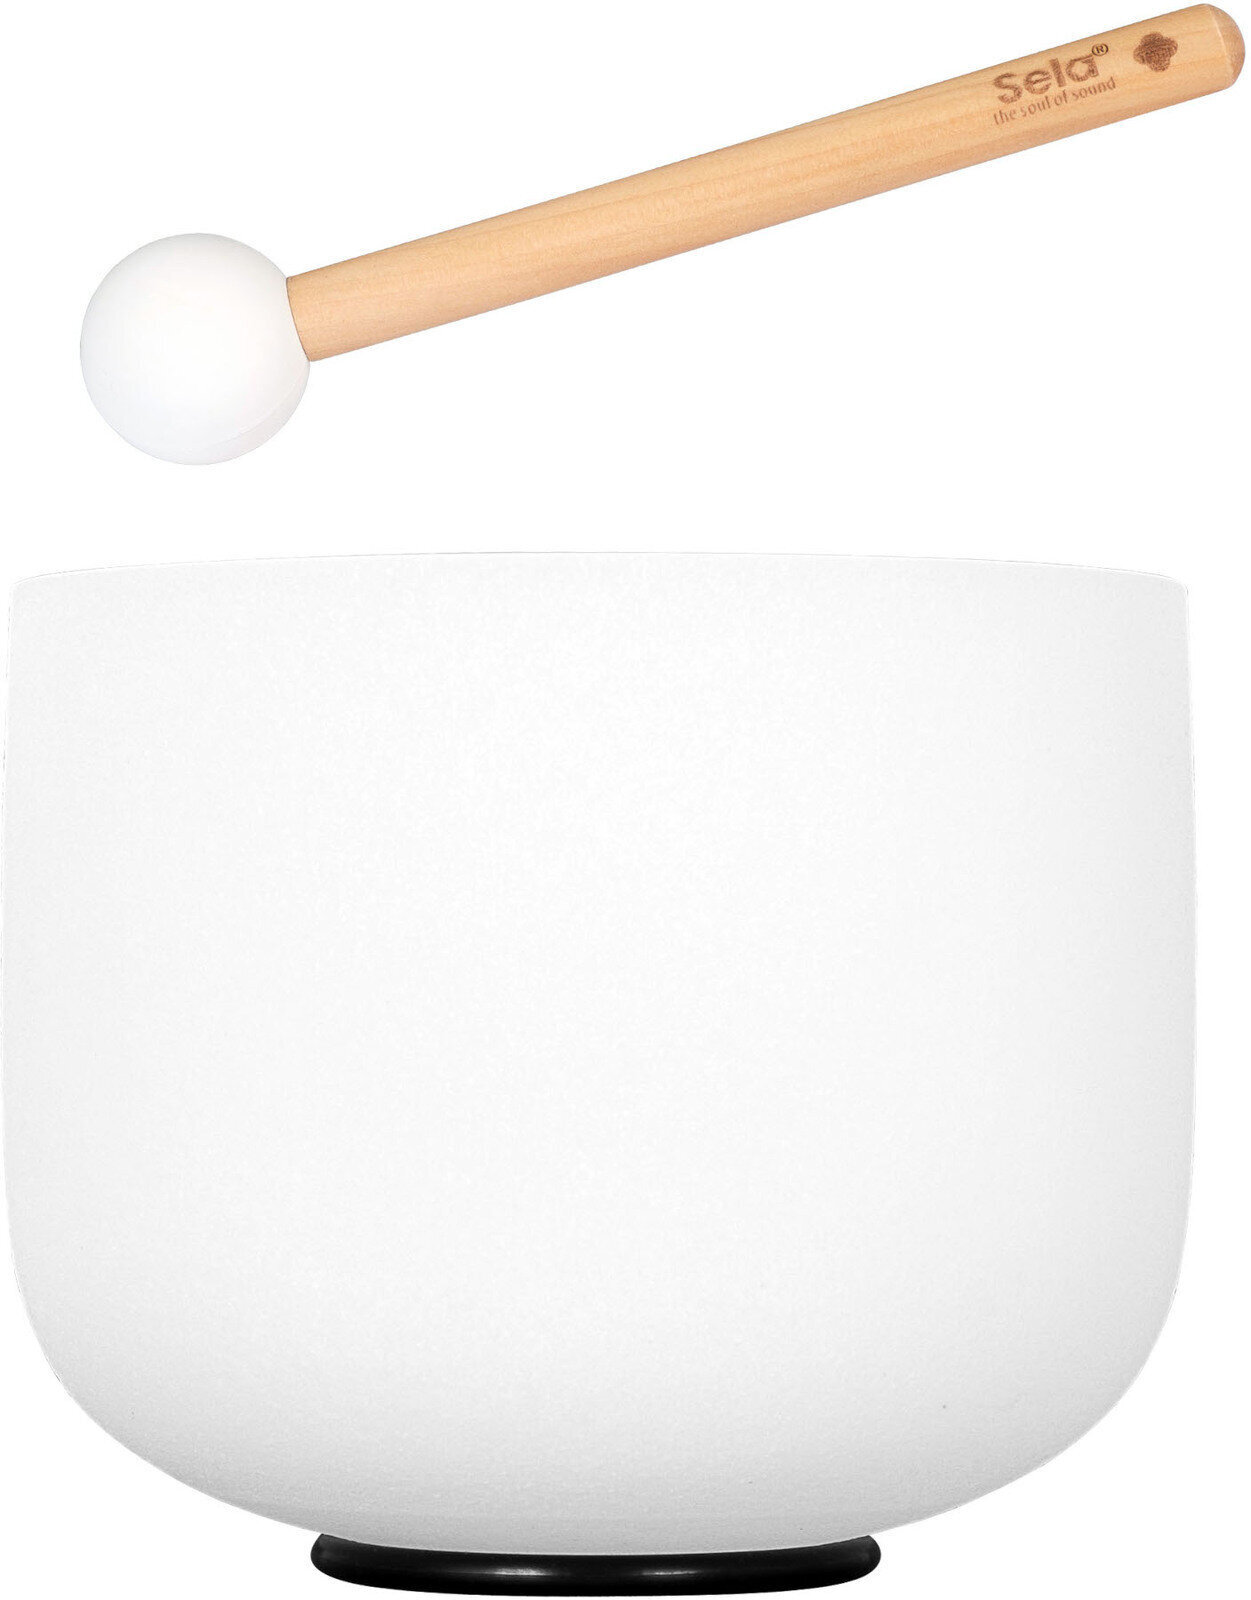 Percussions musicothérapeutiques Sela 10" Crystal Singing Bowl Frosted 440 Hz D incl. 1 Wood Mallet